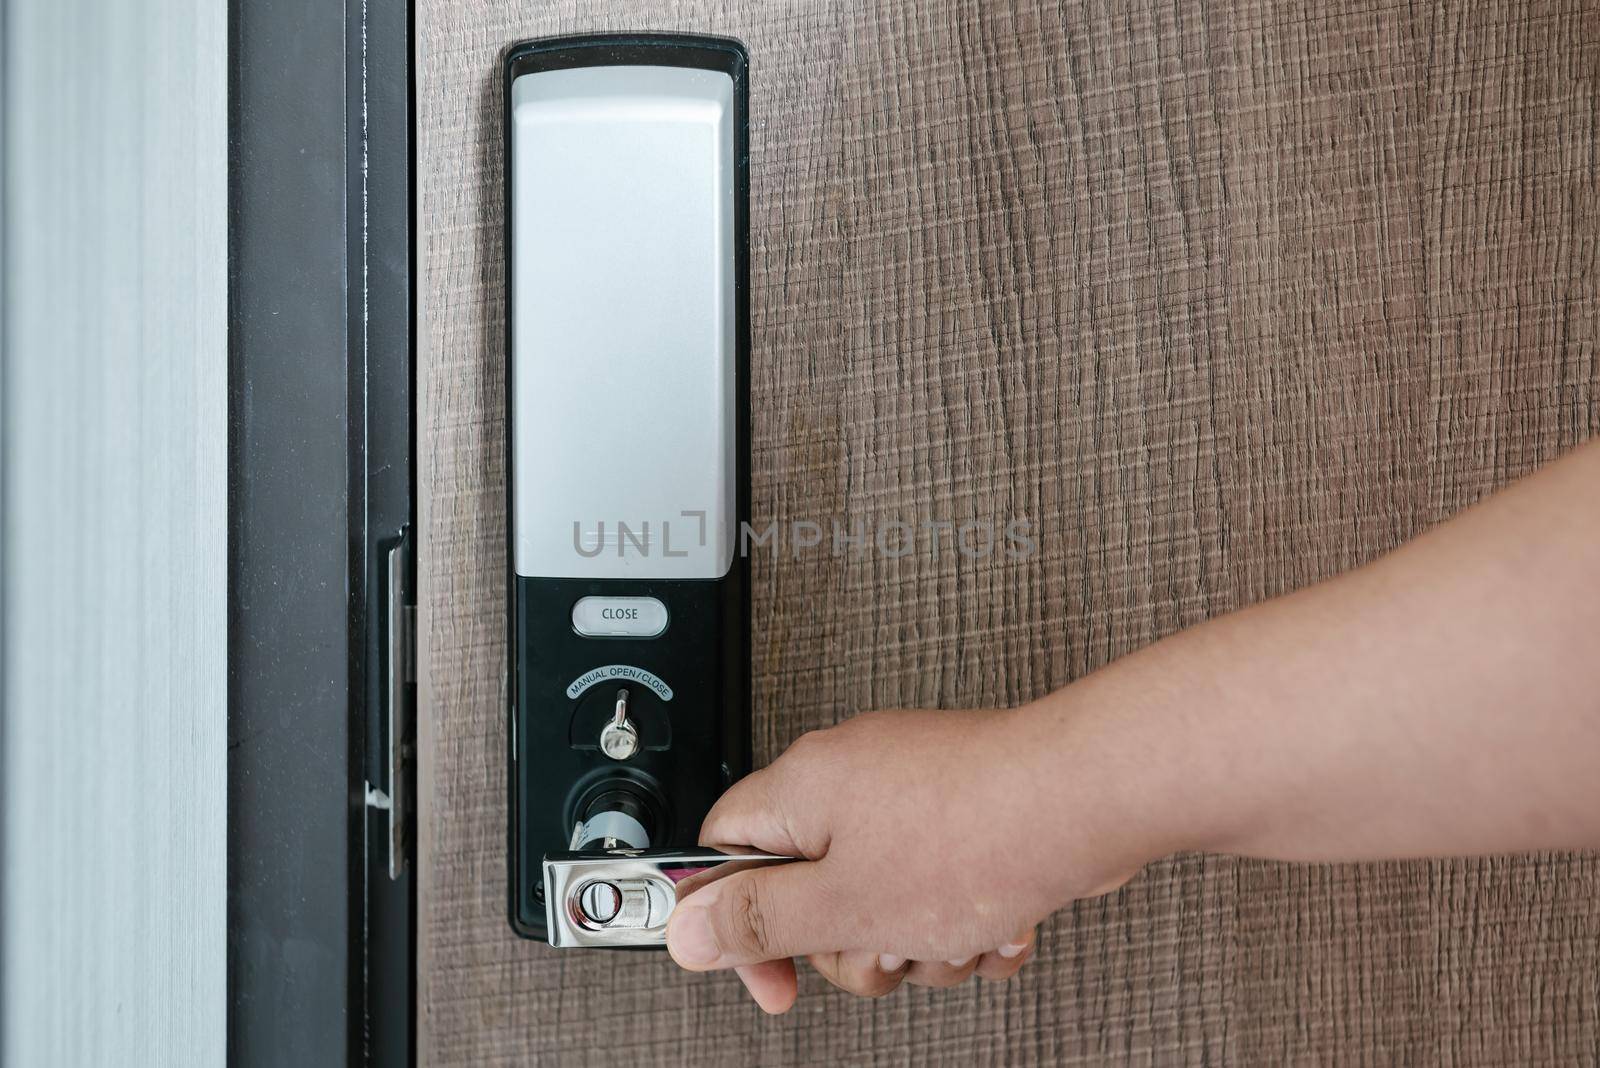 Woman Hand is Holding Door Handle While Opening a Door for Access Apartment Building. Electric Door With Keypad Code for Security System in Apartments Room. Electronic Door for Entrance-Exit Building. by MahaHeang245789